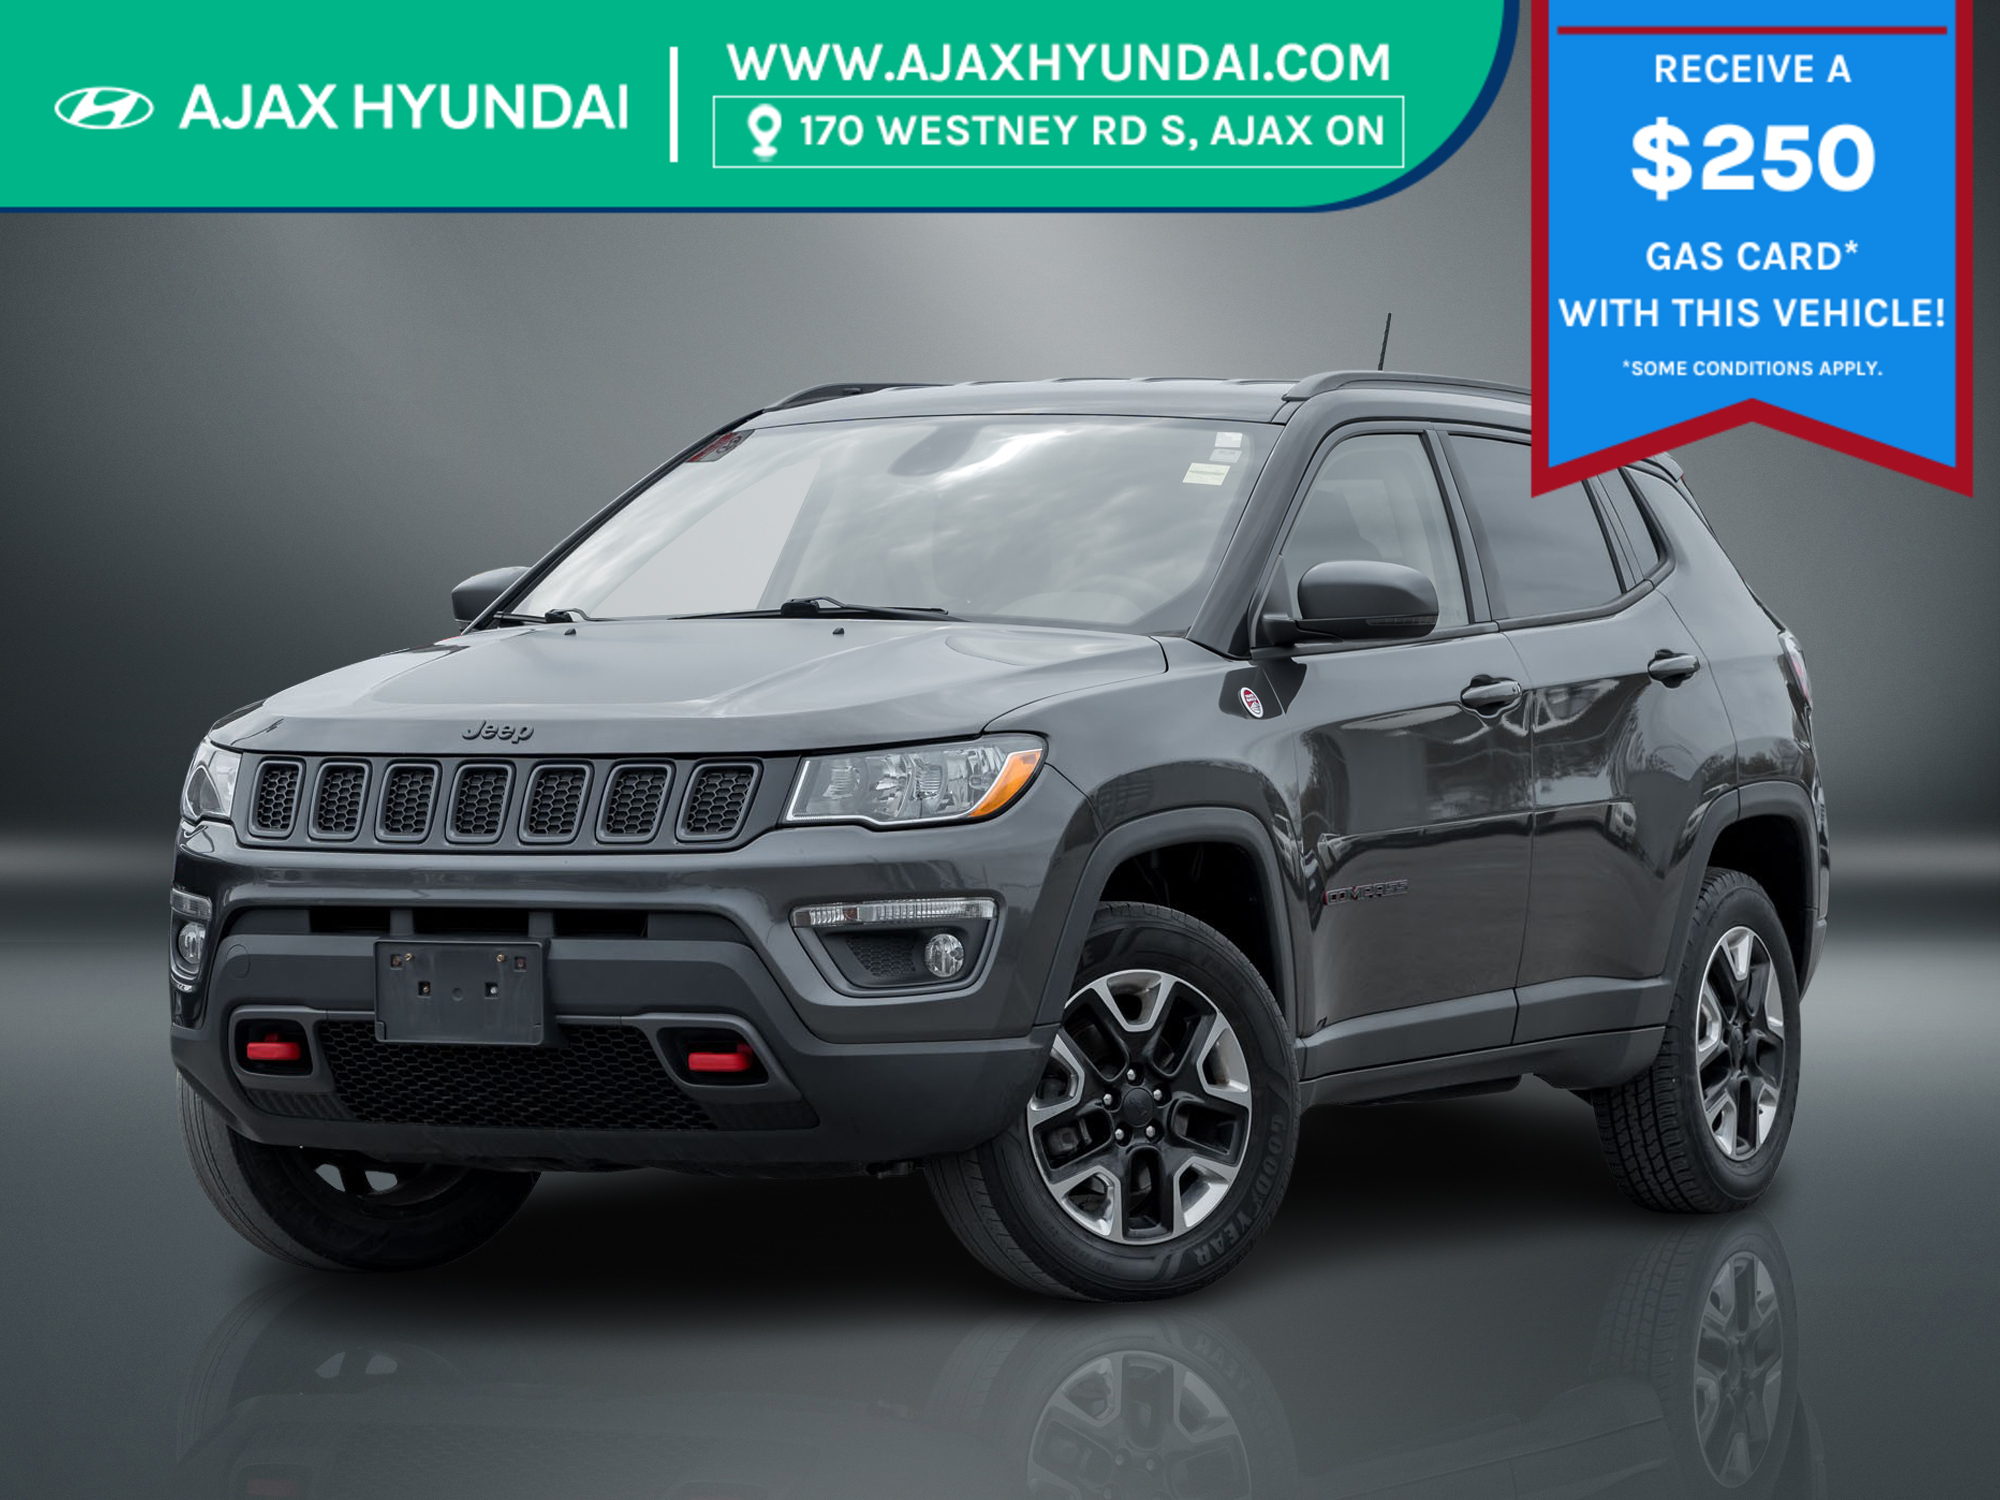 2017 Jeep Compass Trailhawk ALL WHEEL DRIVE | SAFETY CERTIFIED